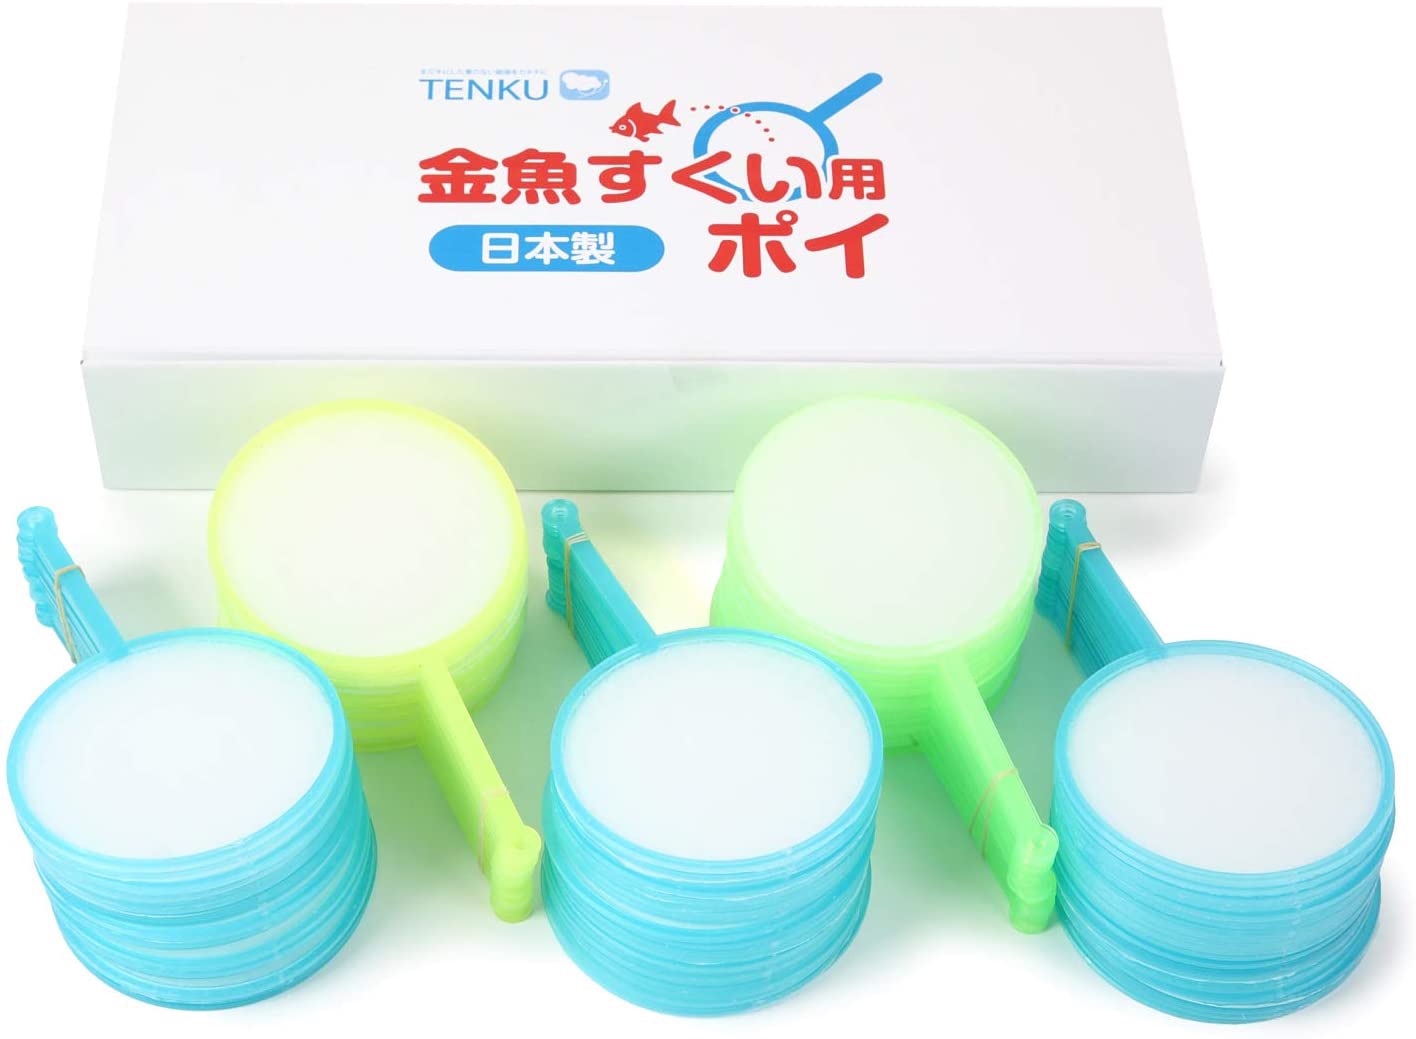 PRODUCTS | TENKU